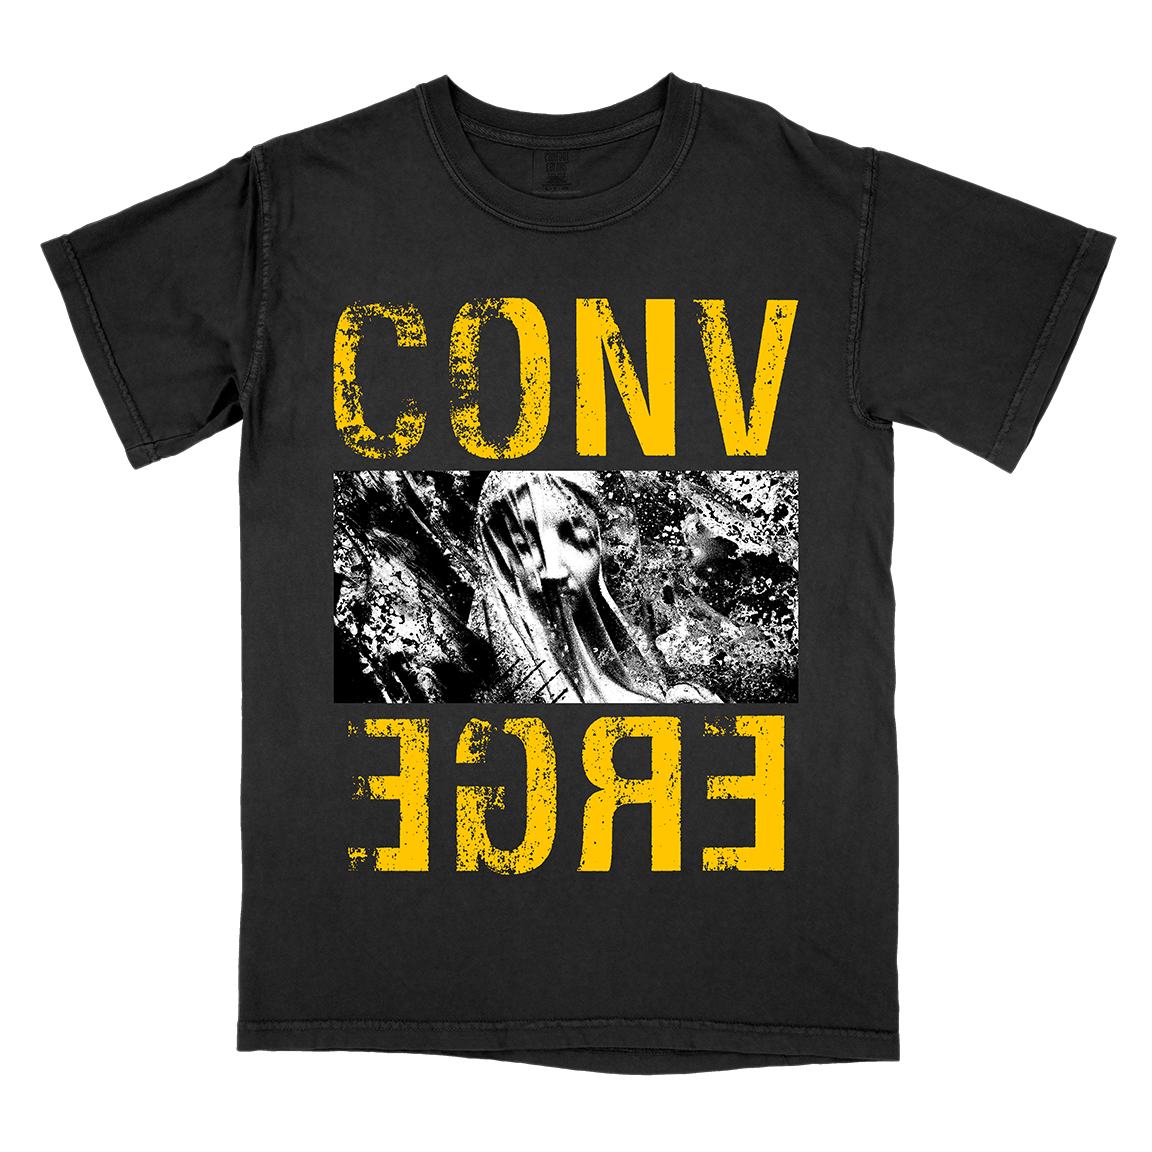 CONVERGE “I Can Tell You About Pain” Premium Graphite T-Shirt